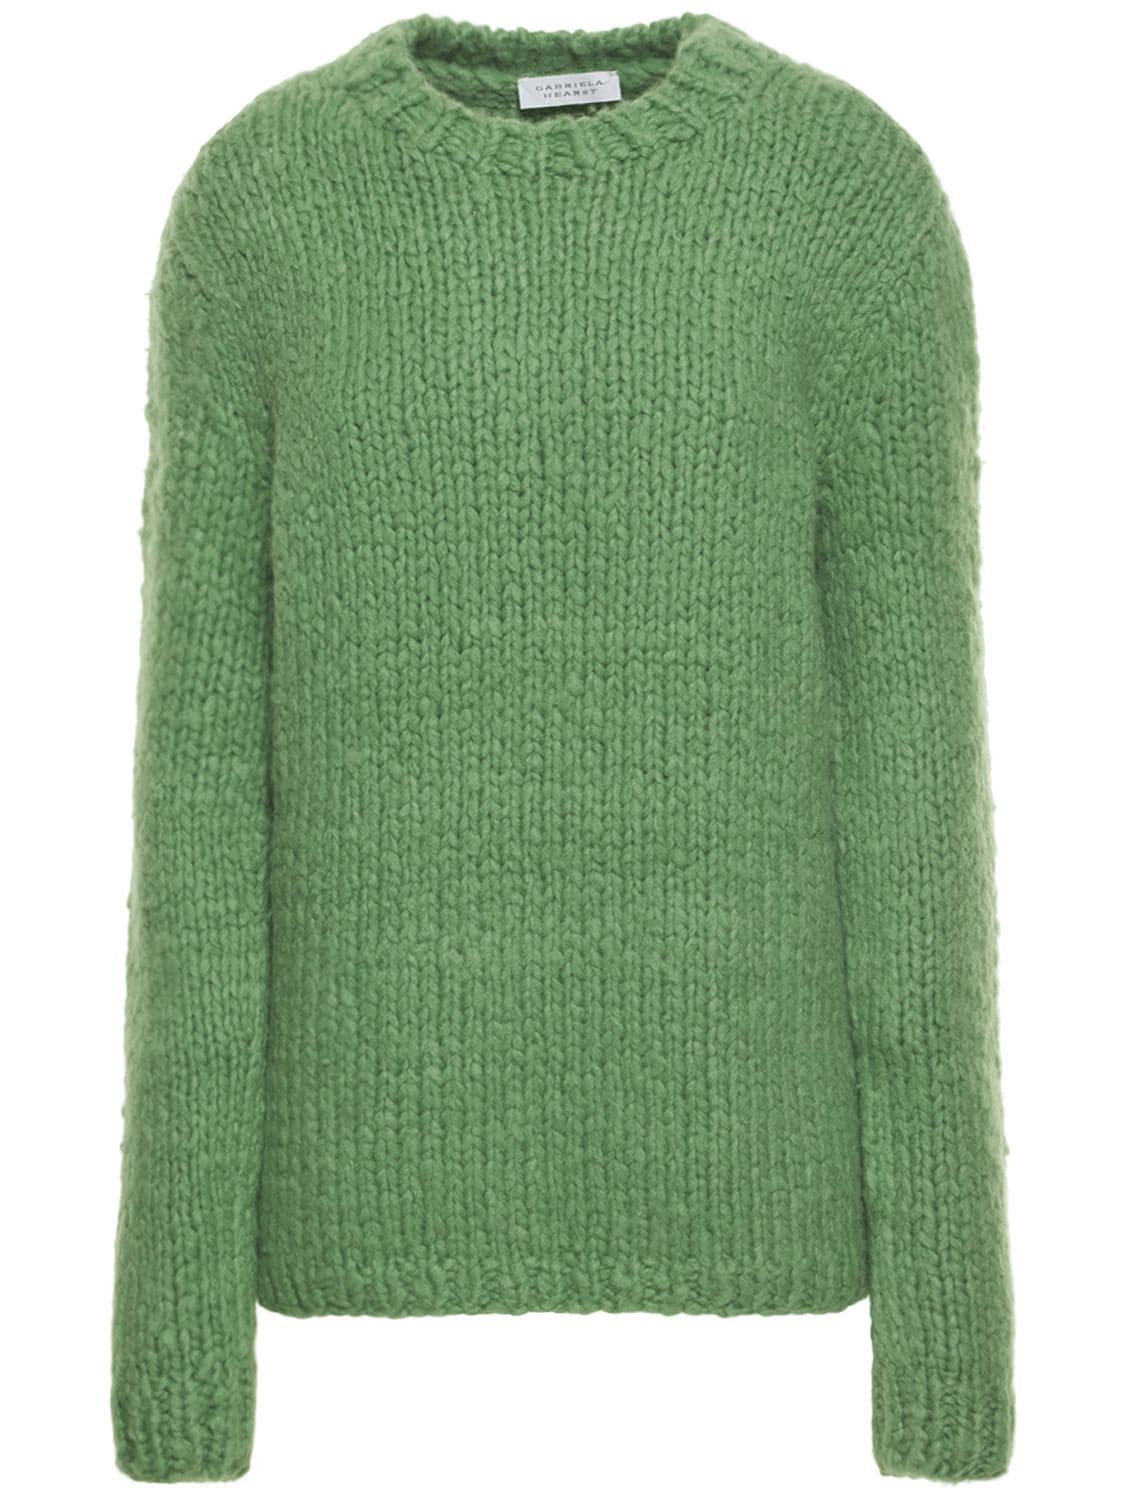 GABRIELA HEARST LAWRENCE CASHMERE SWEATER